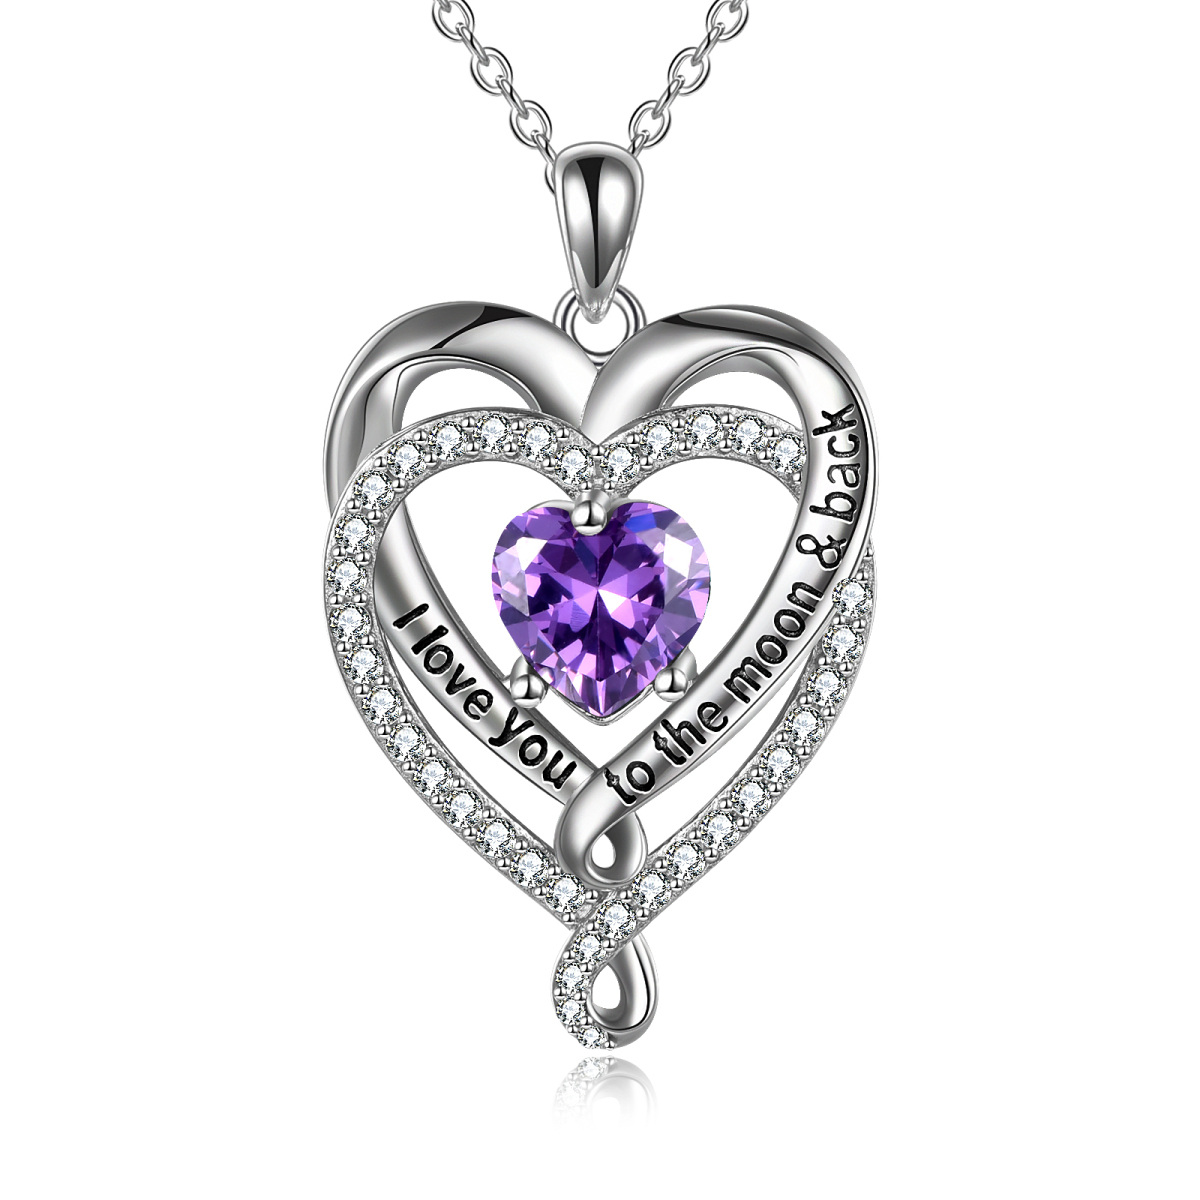 Sterling Silver Heart Shaped Cubic Zirconia Heart With Heart Pendant Necklace with Engraved Word-1